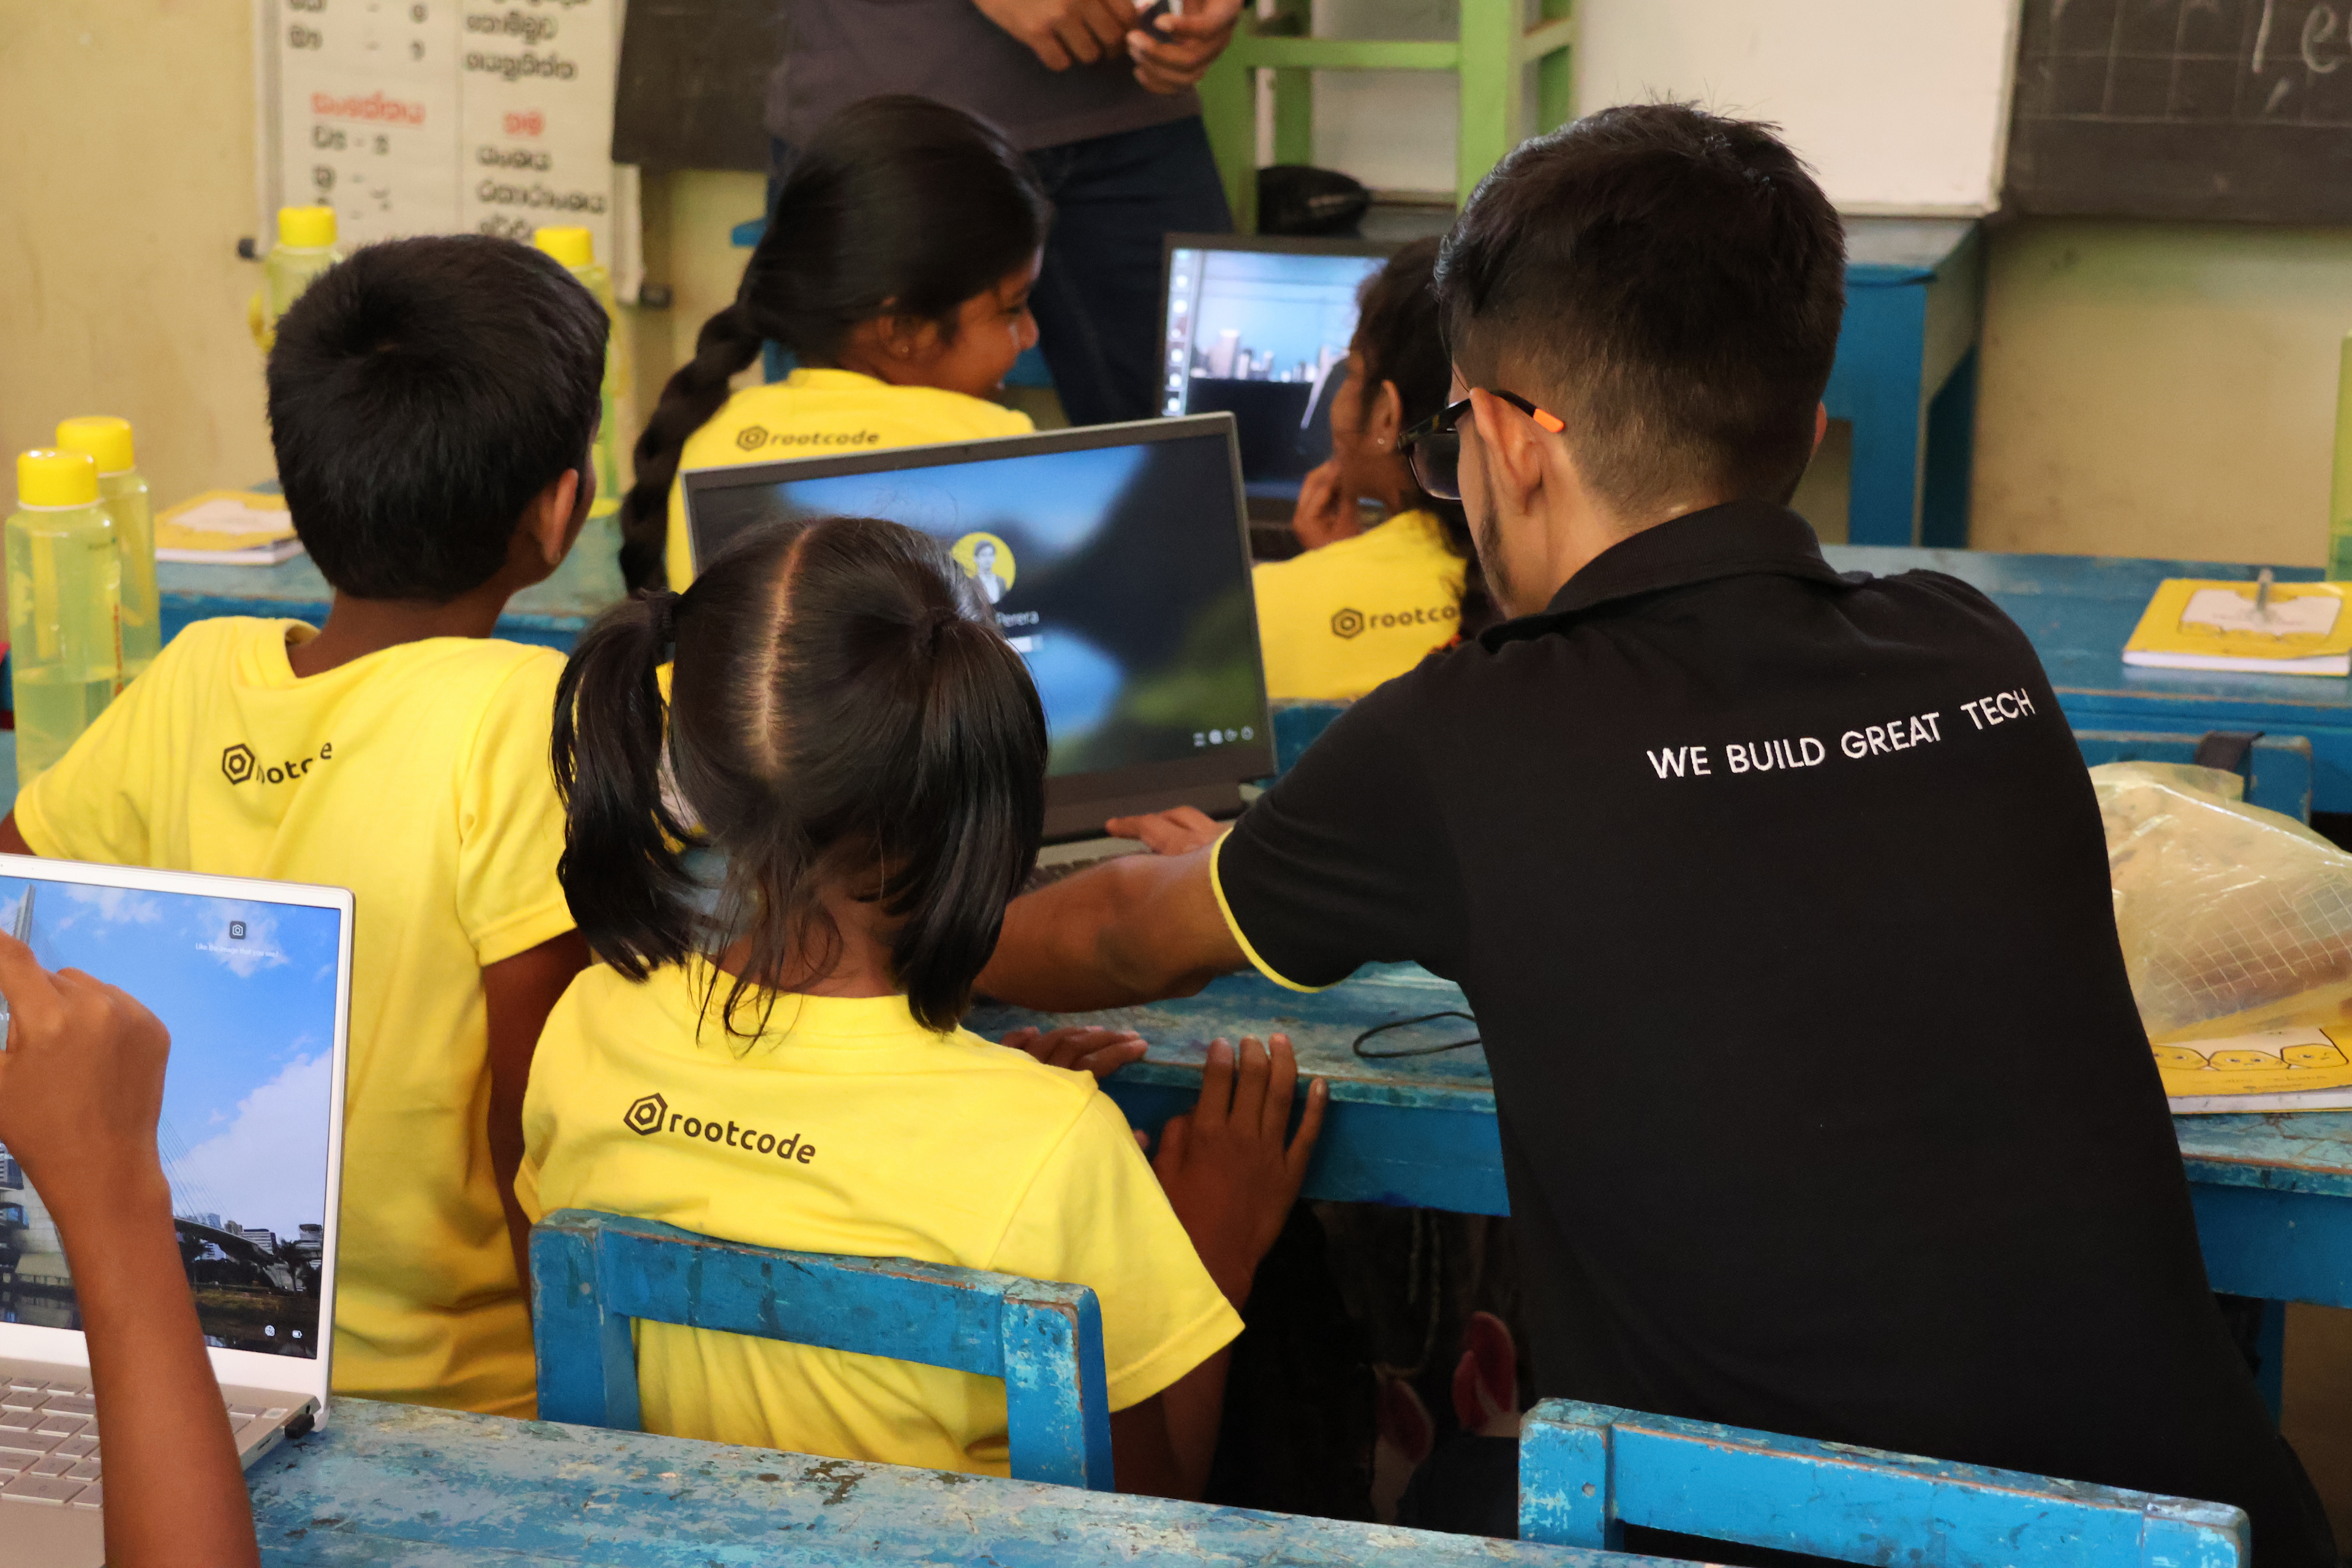 A Rootcoder instructing students on how to use a laptop